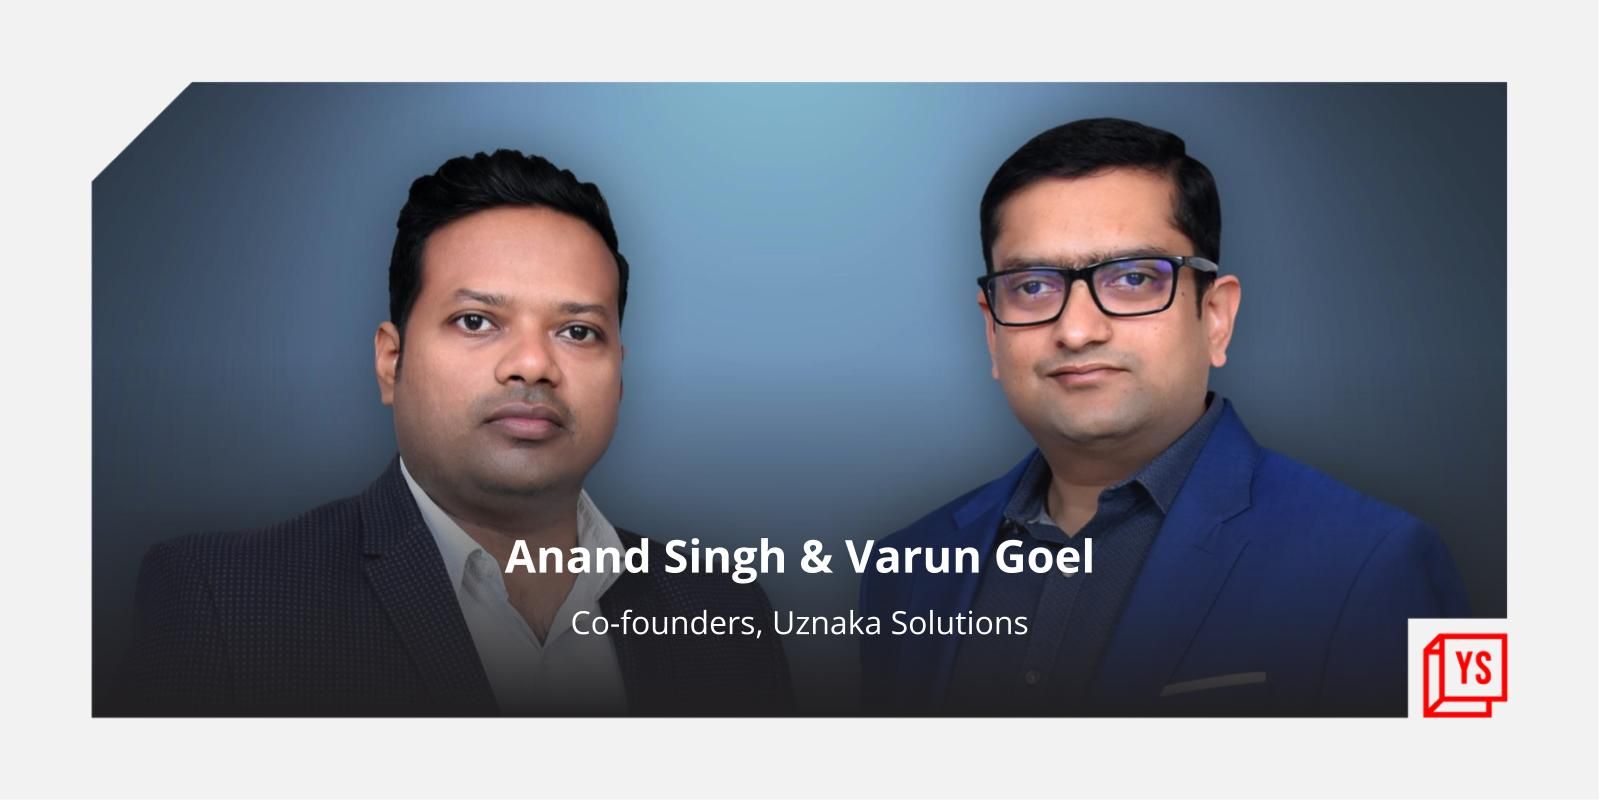 [Tech50] How Noida-based startup Uznaka Solutions is building complete in-house EV chargers with proprietary tech
